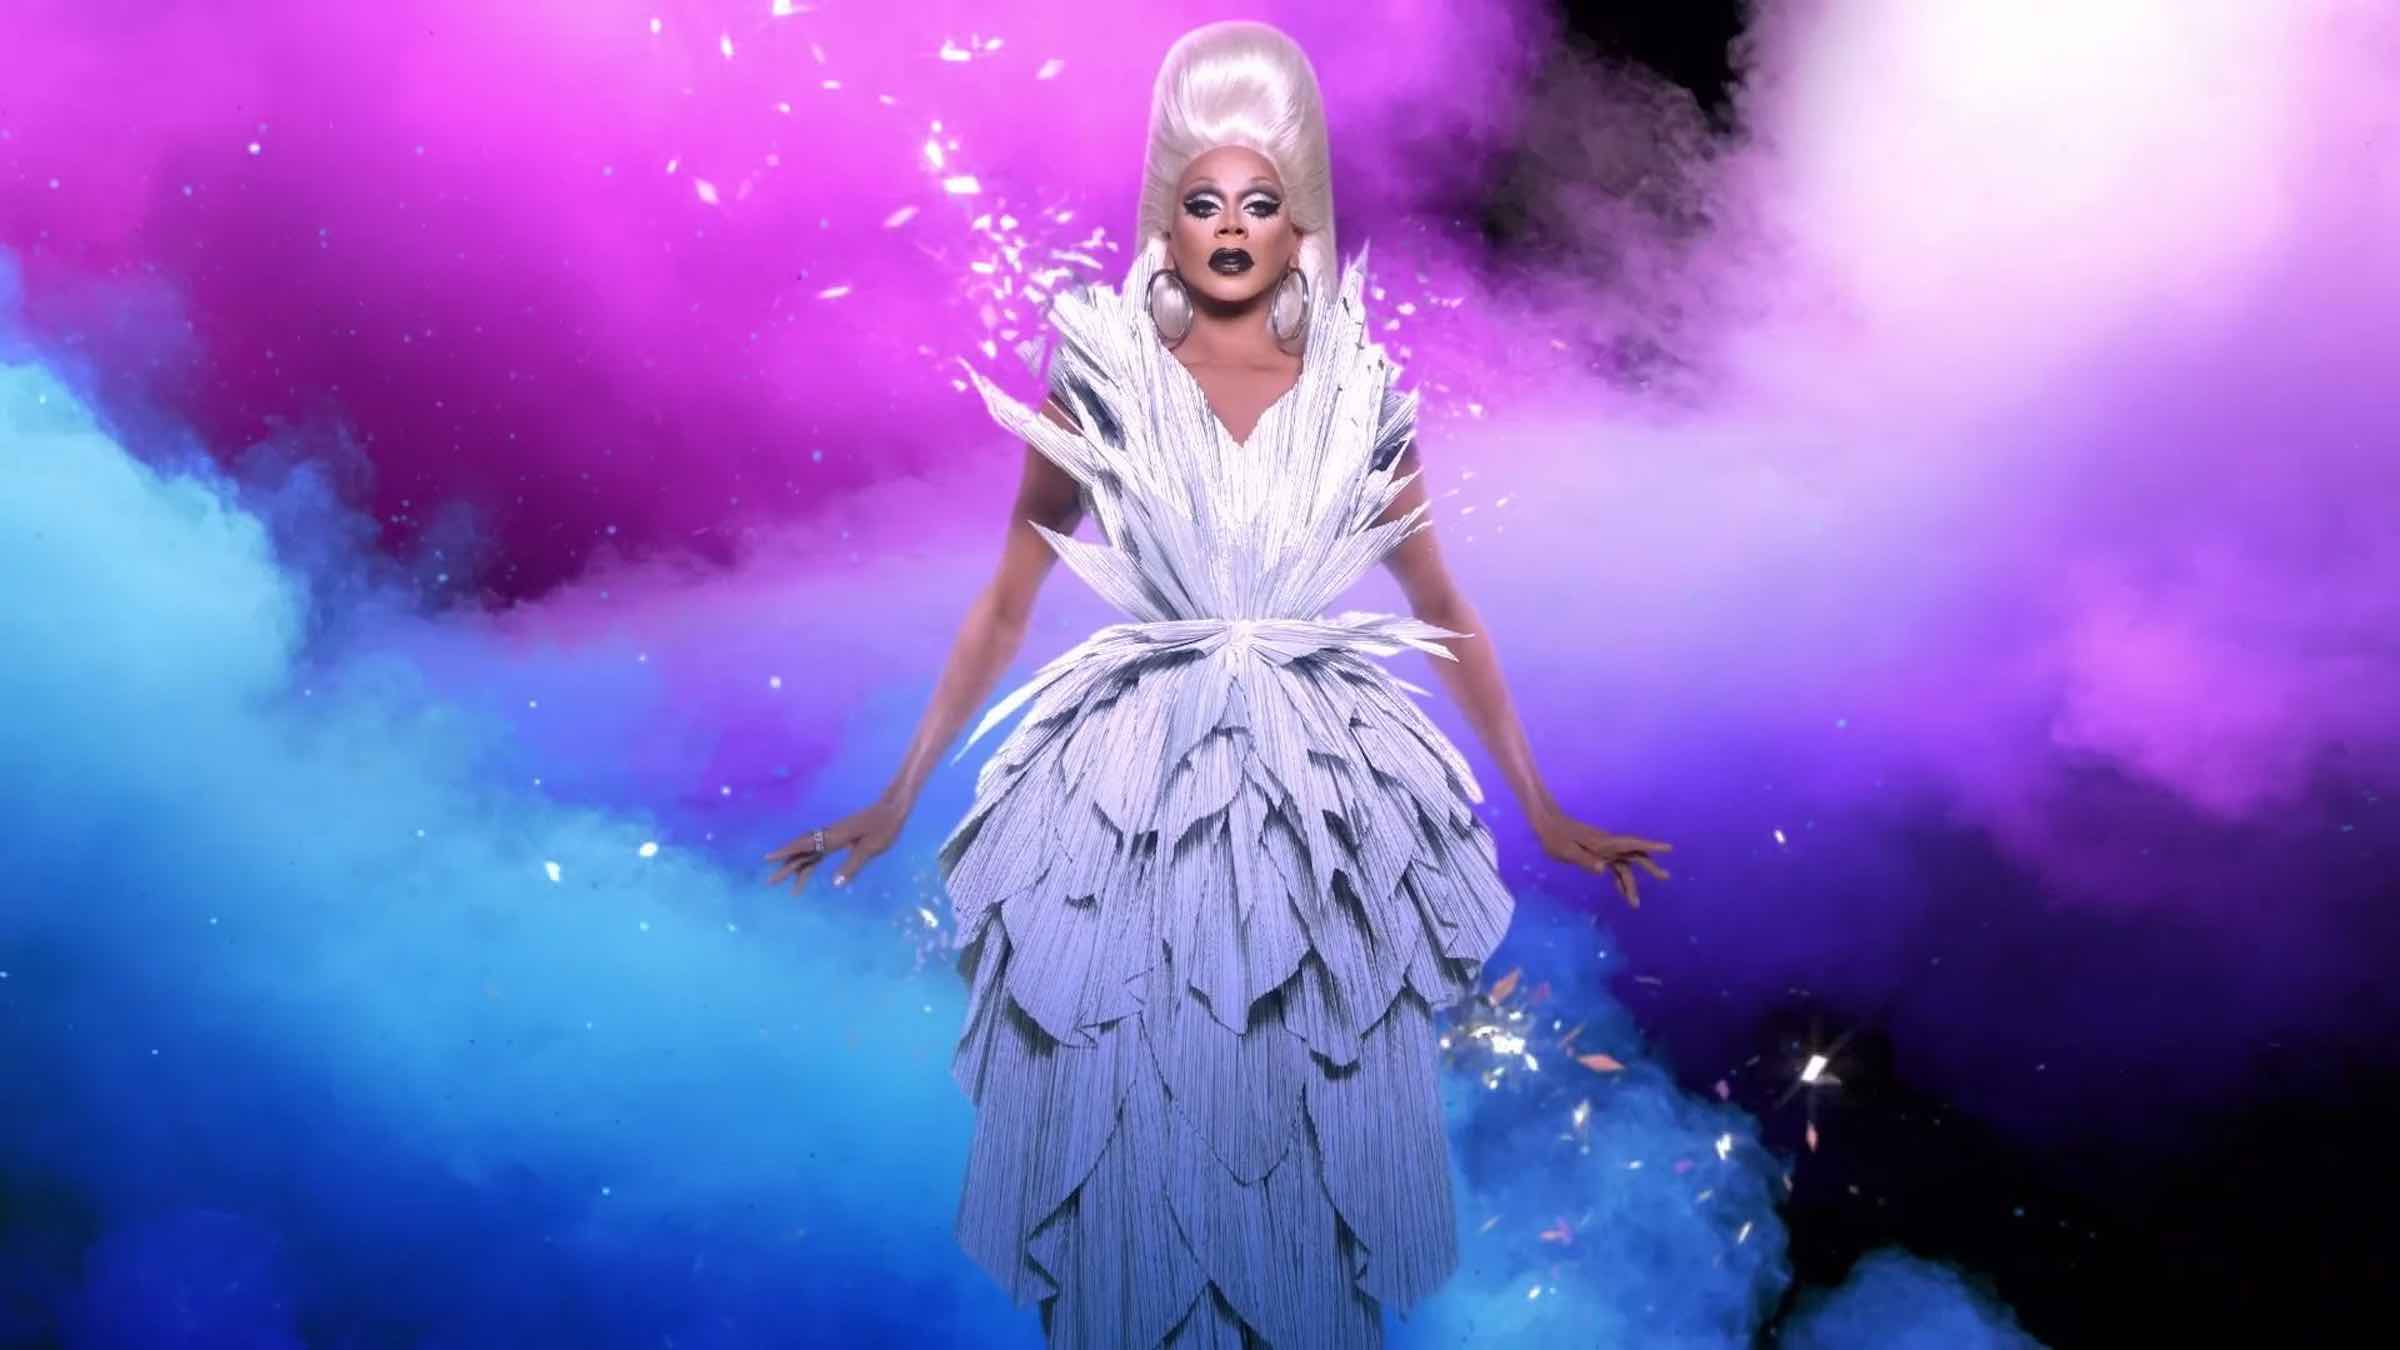 Mama Ru has delivered us another fabulous season of 'RuPaul’s Drag Race'! In honor, we decided to dedicate a whole quiz to season 11.